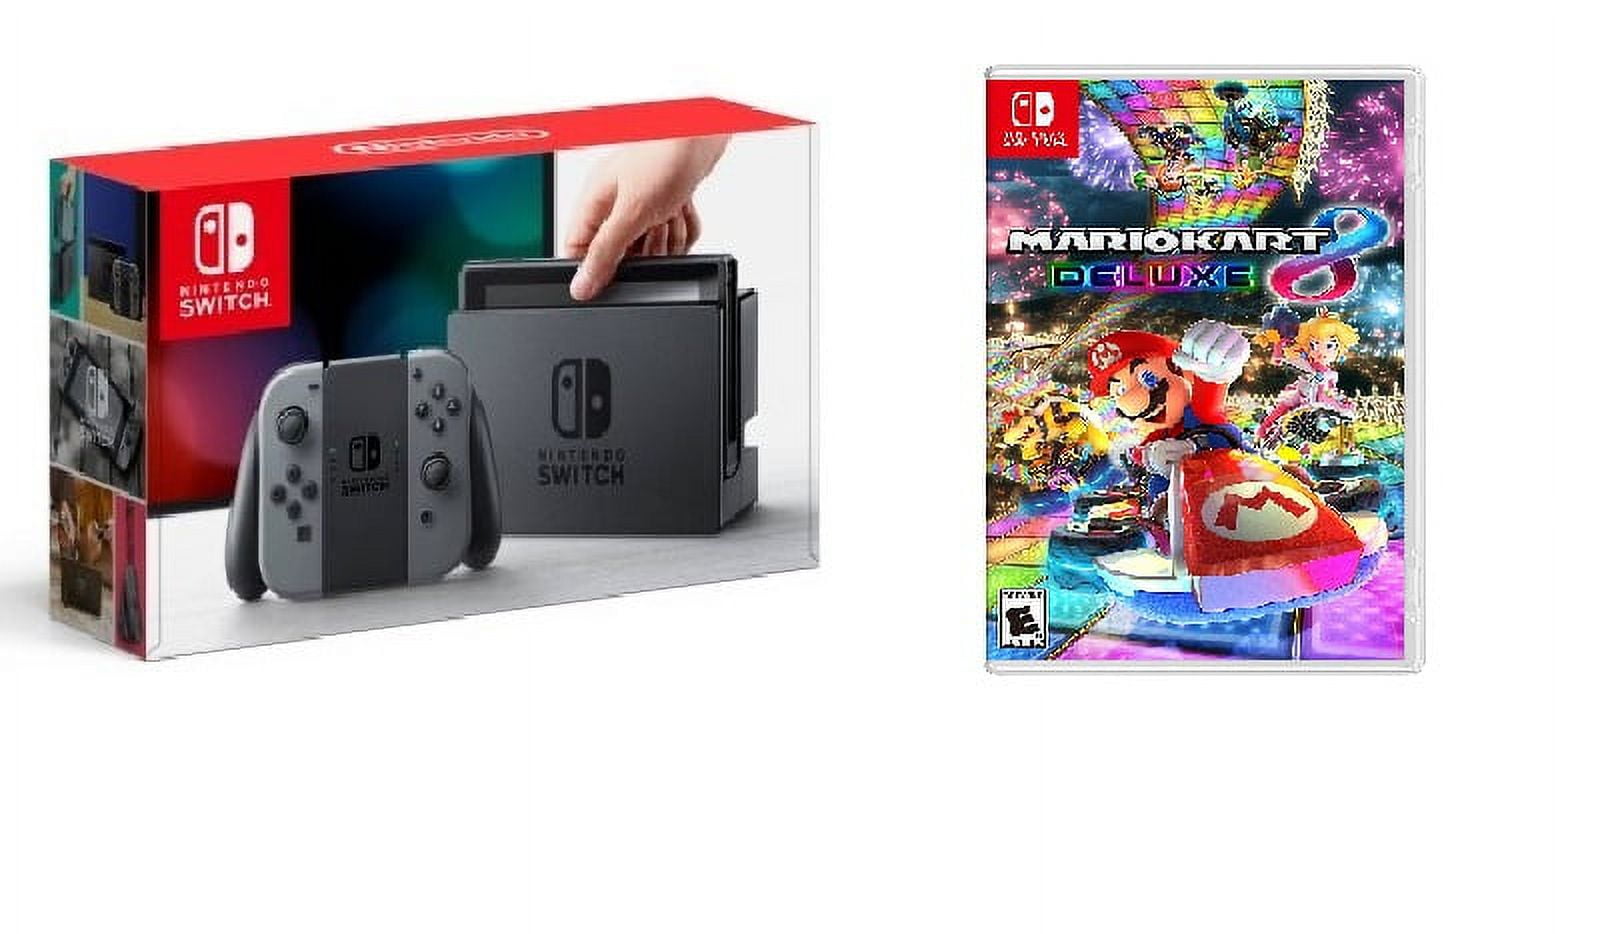 Nintendo Switch OLED with Pro Controller and Mario Kart 8 Deluxe Game  Bundle NS-HEGSKAAAA White - US